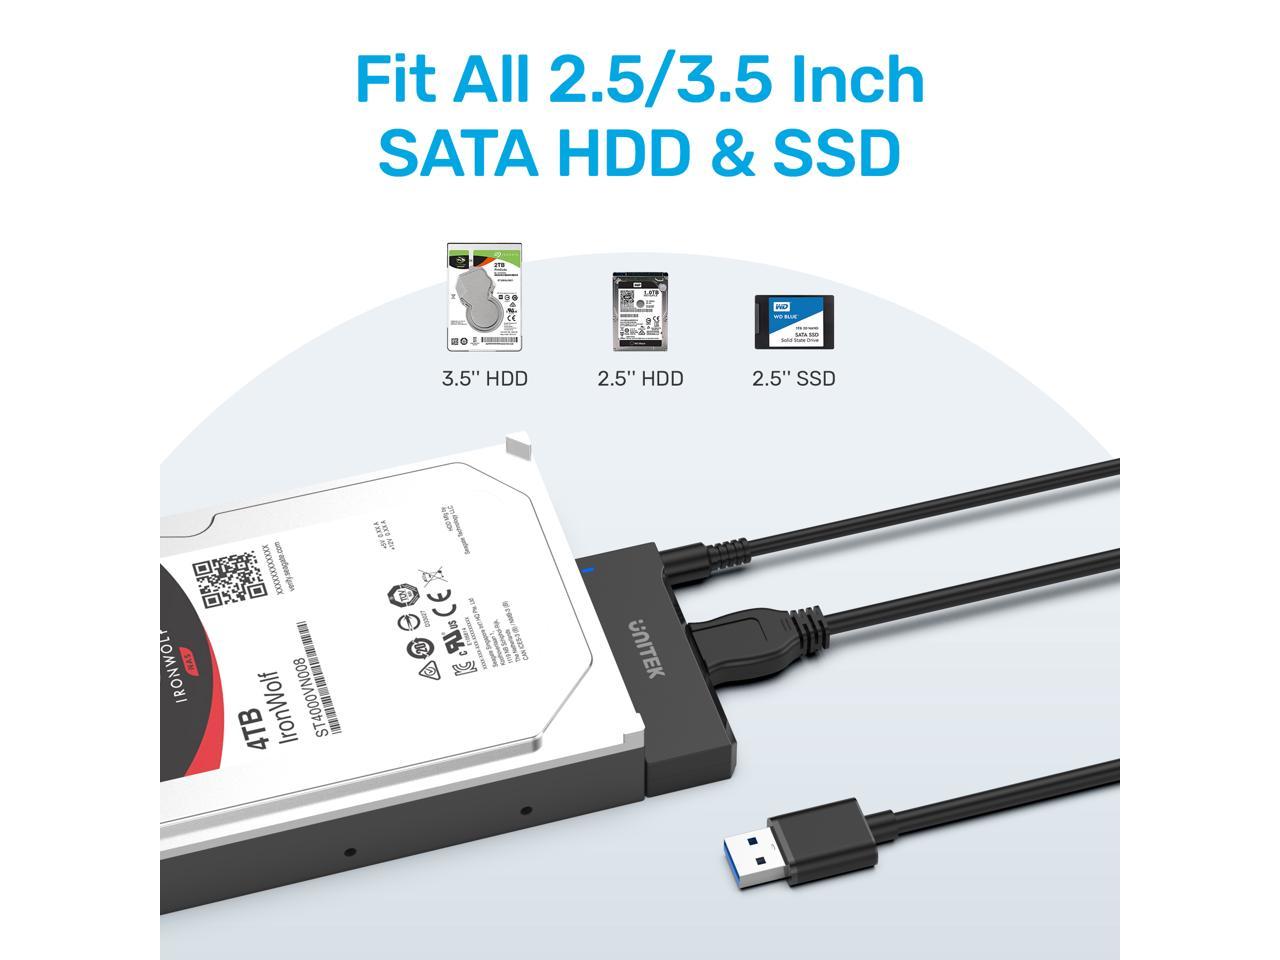 Computer Cables 1pc USB 3.0 SATA 3 Cable Sata to USB Adapter Up to 5 Gbps Support 2.5 Inches External SSD HDD Hard Drive Sata III Cable Cable Length: Other 